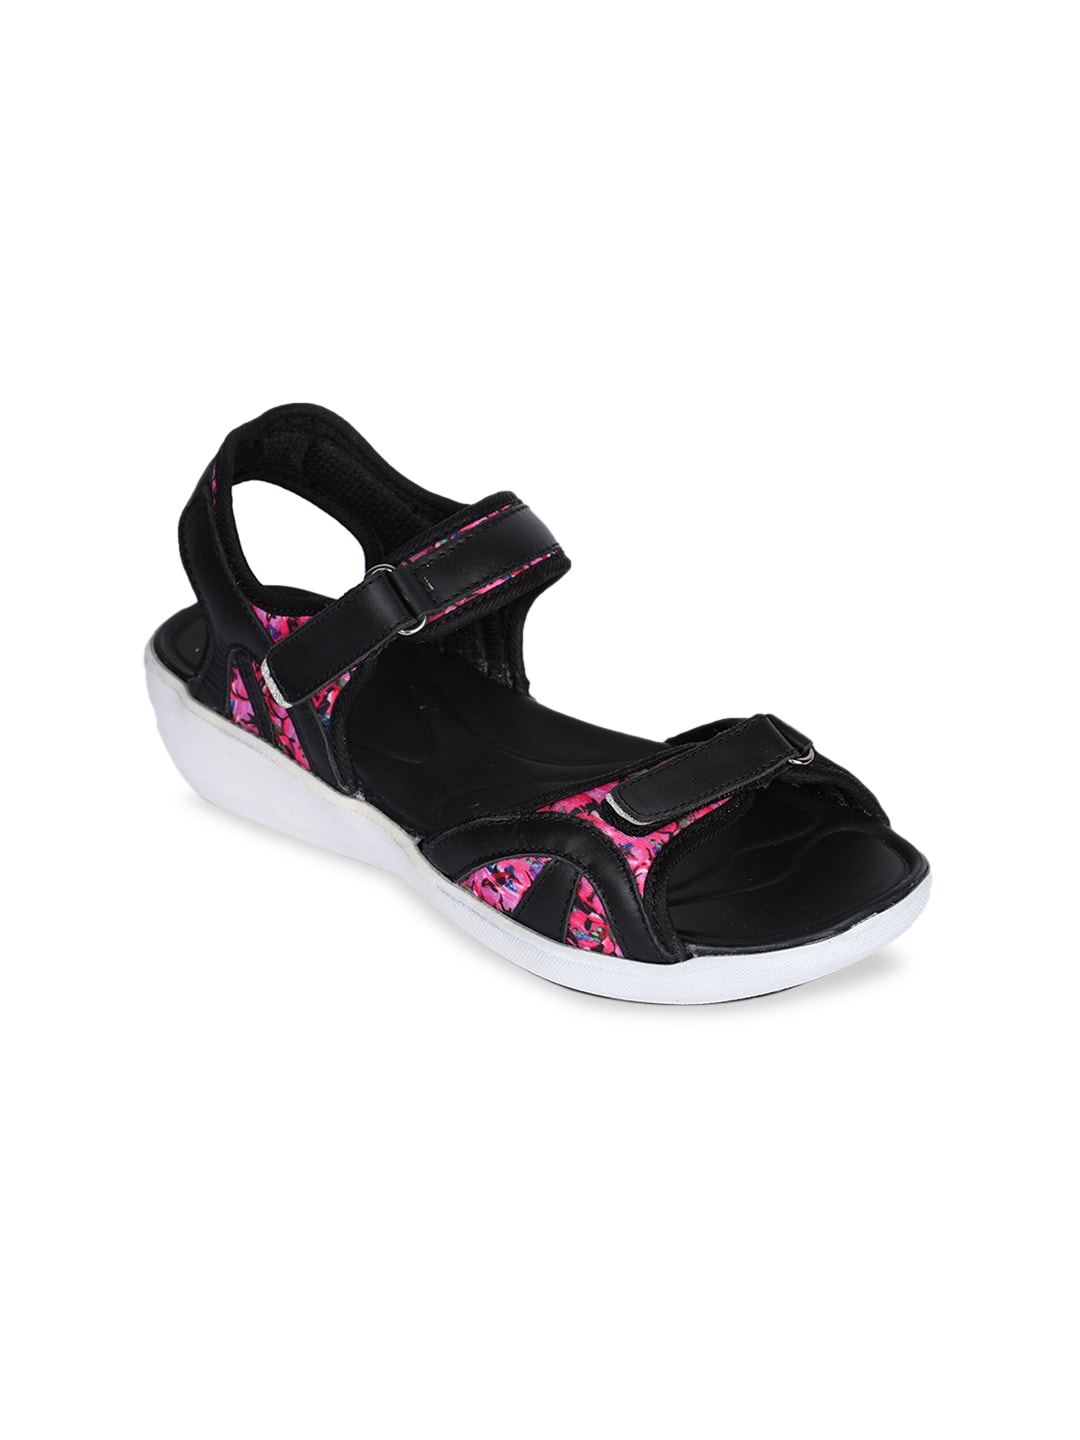 Liberty Women Black & Pink Leather Sports Sandals Price in India